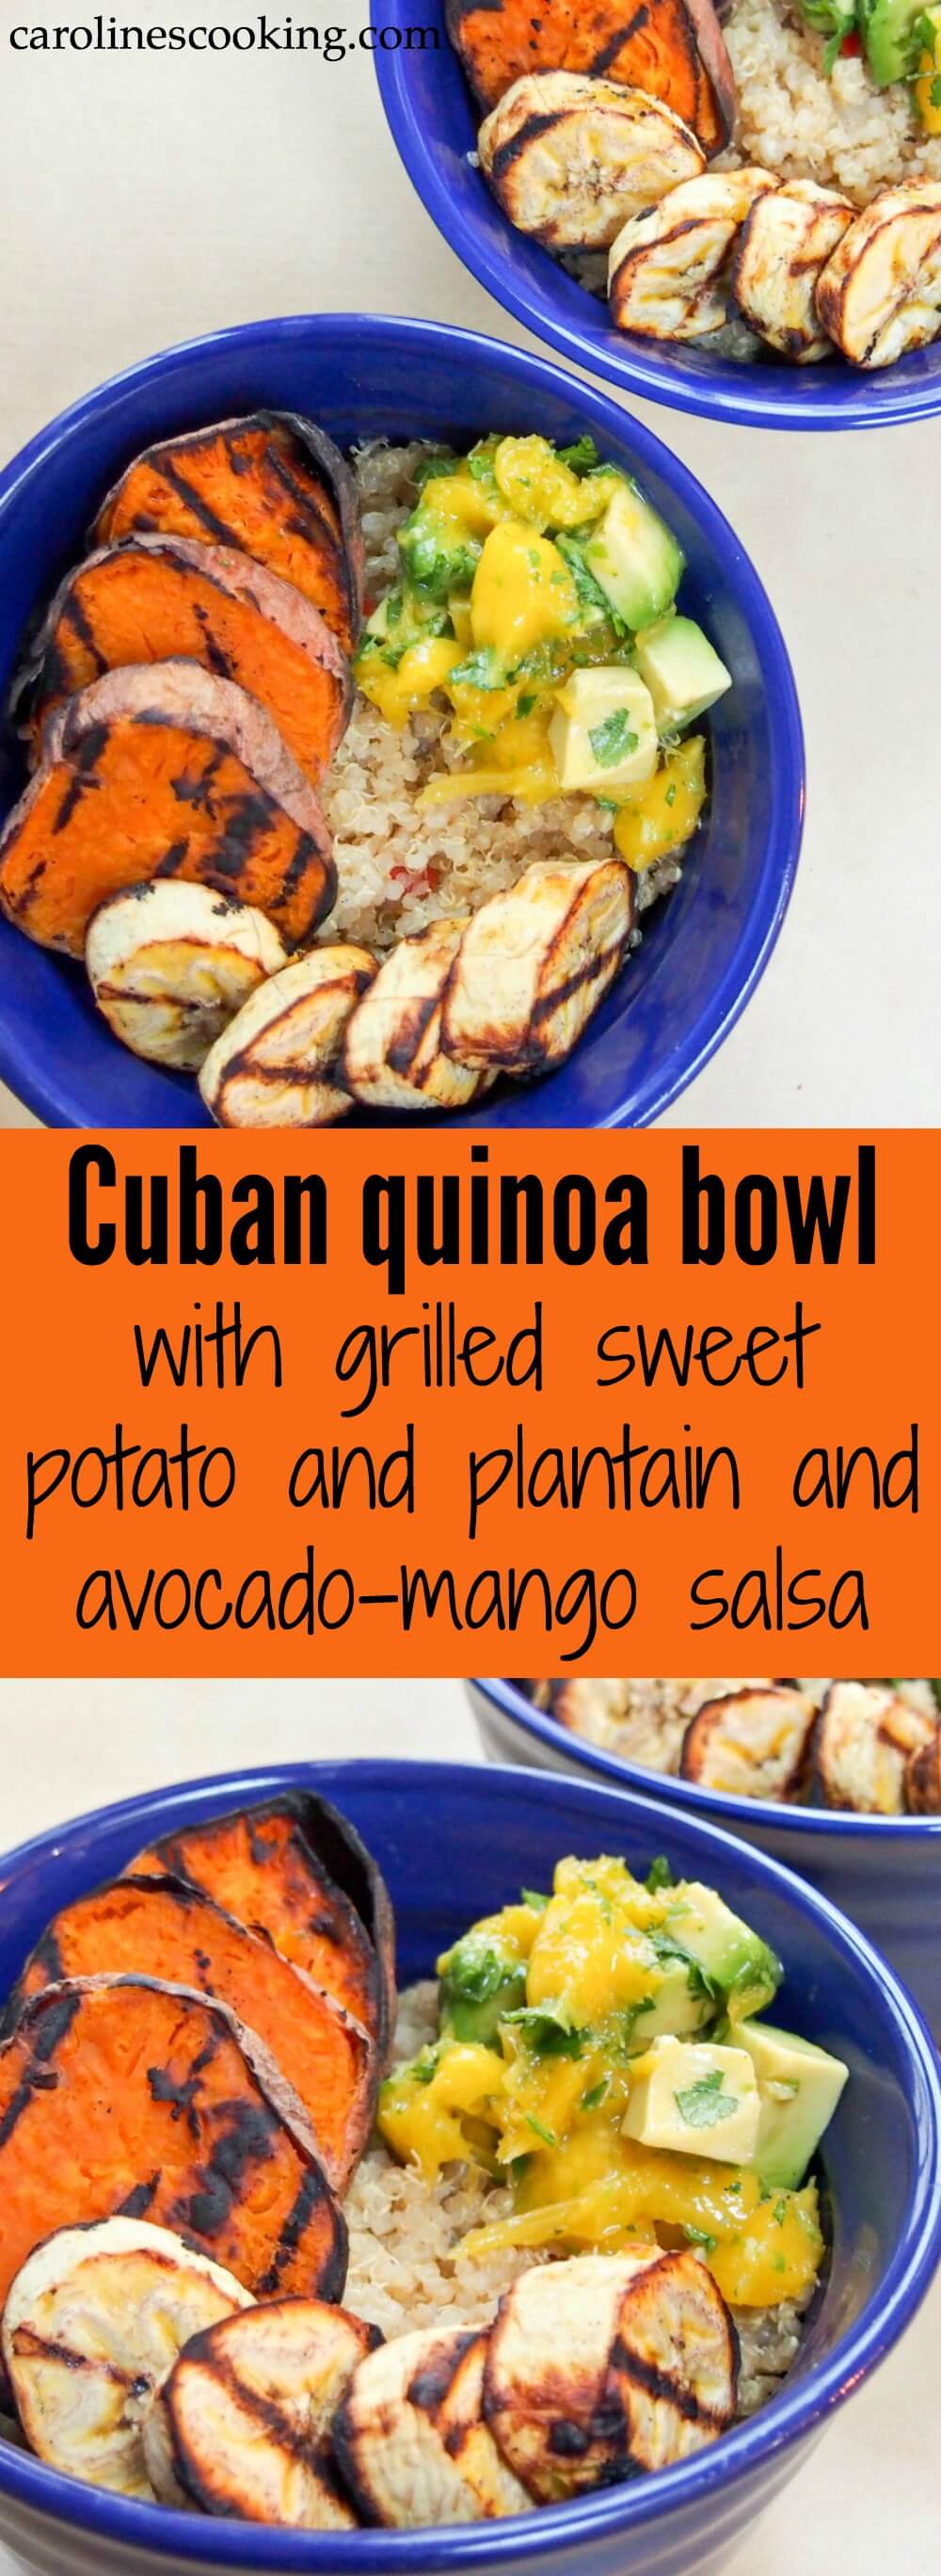 This Cuban quinoa bowl is gently flavored and served with smoky grilled sweet potato, plantain & a zippy avocado-mango salsa.  Quick to make, so tasty, it's a great summer meal.  Vegan, vegetarian, gluten-free and dairy-free